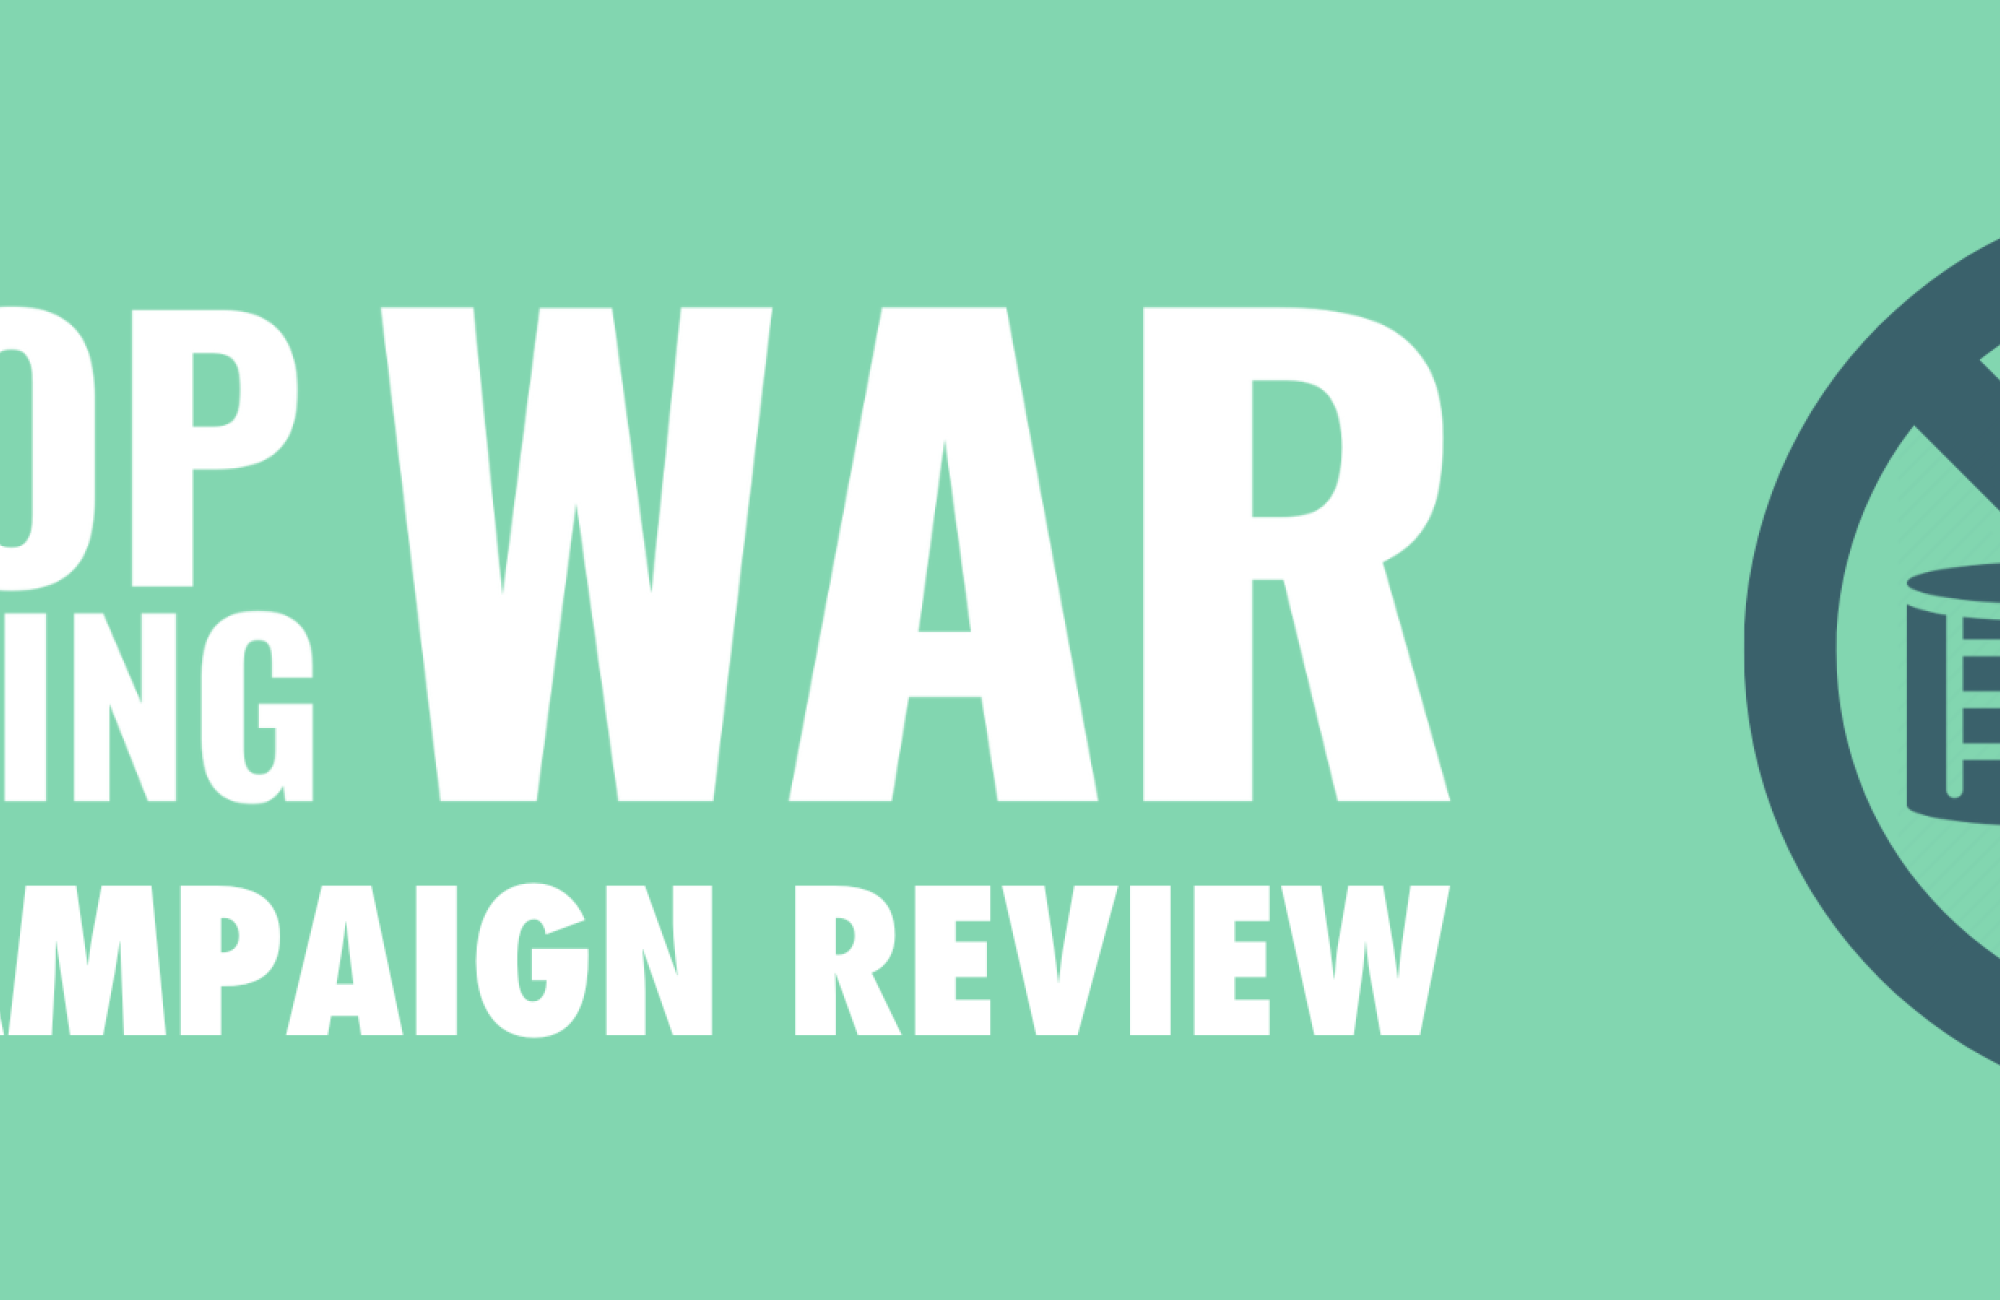 SFW campaign review